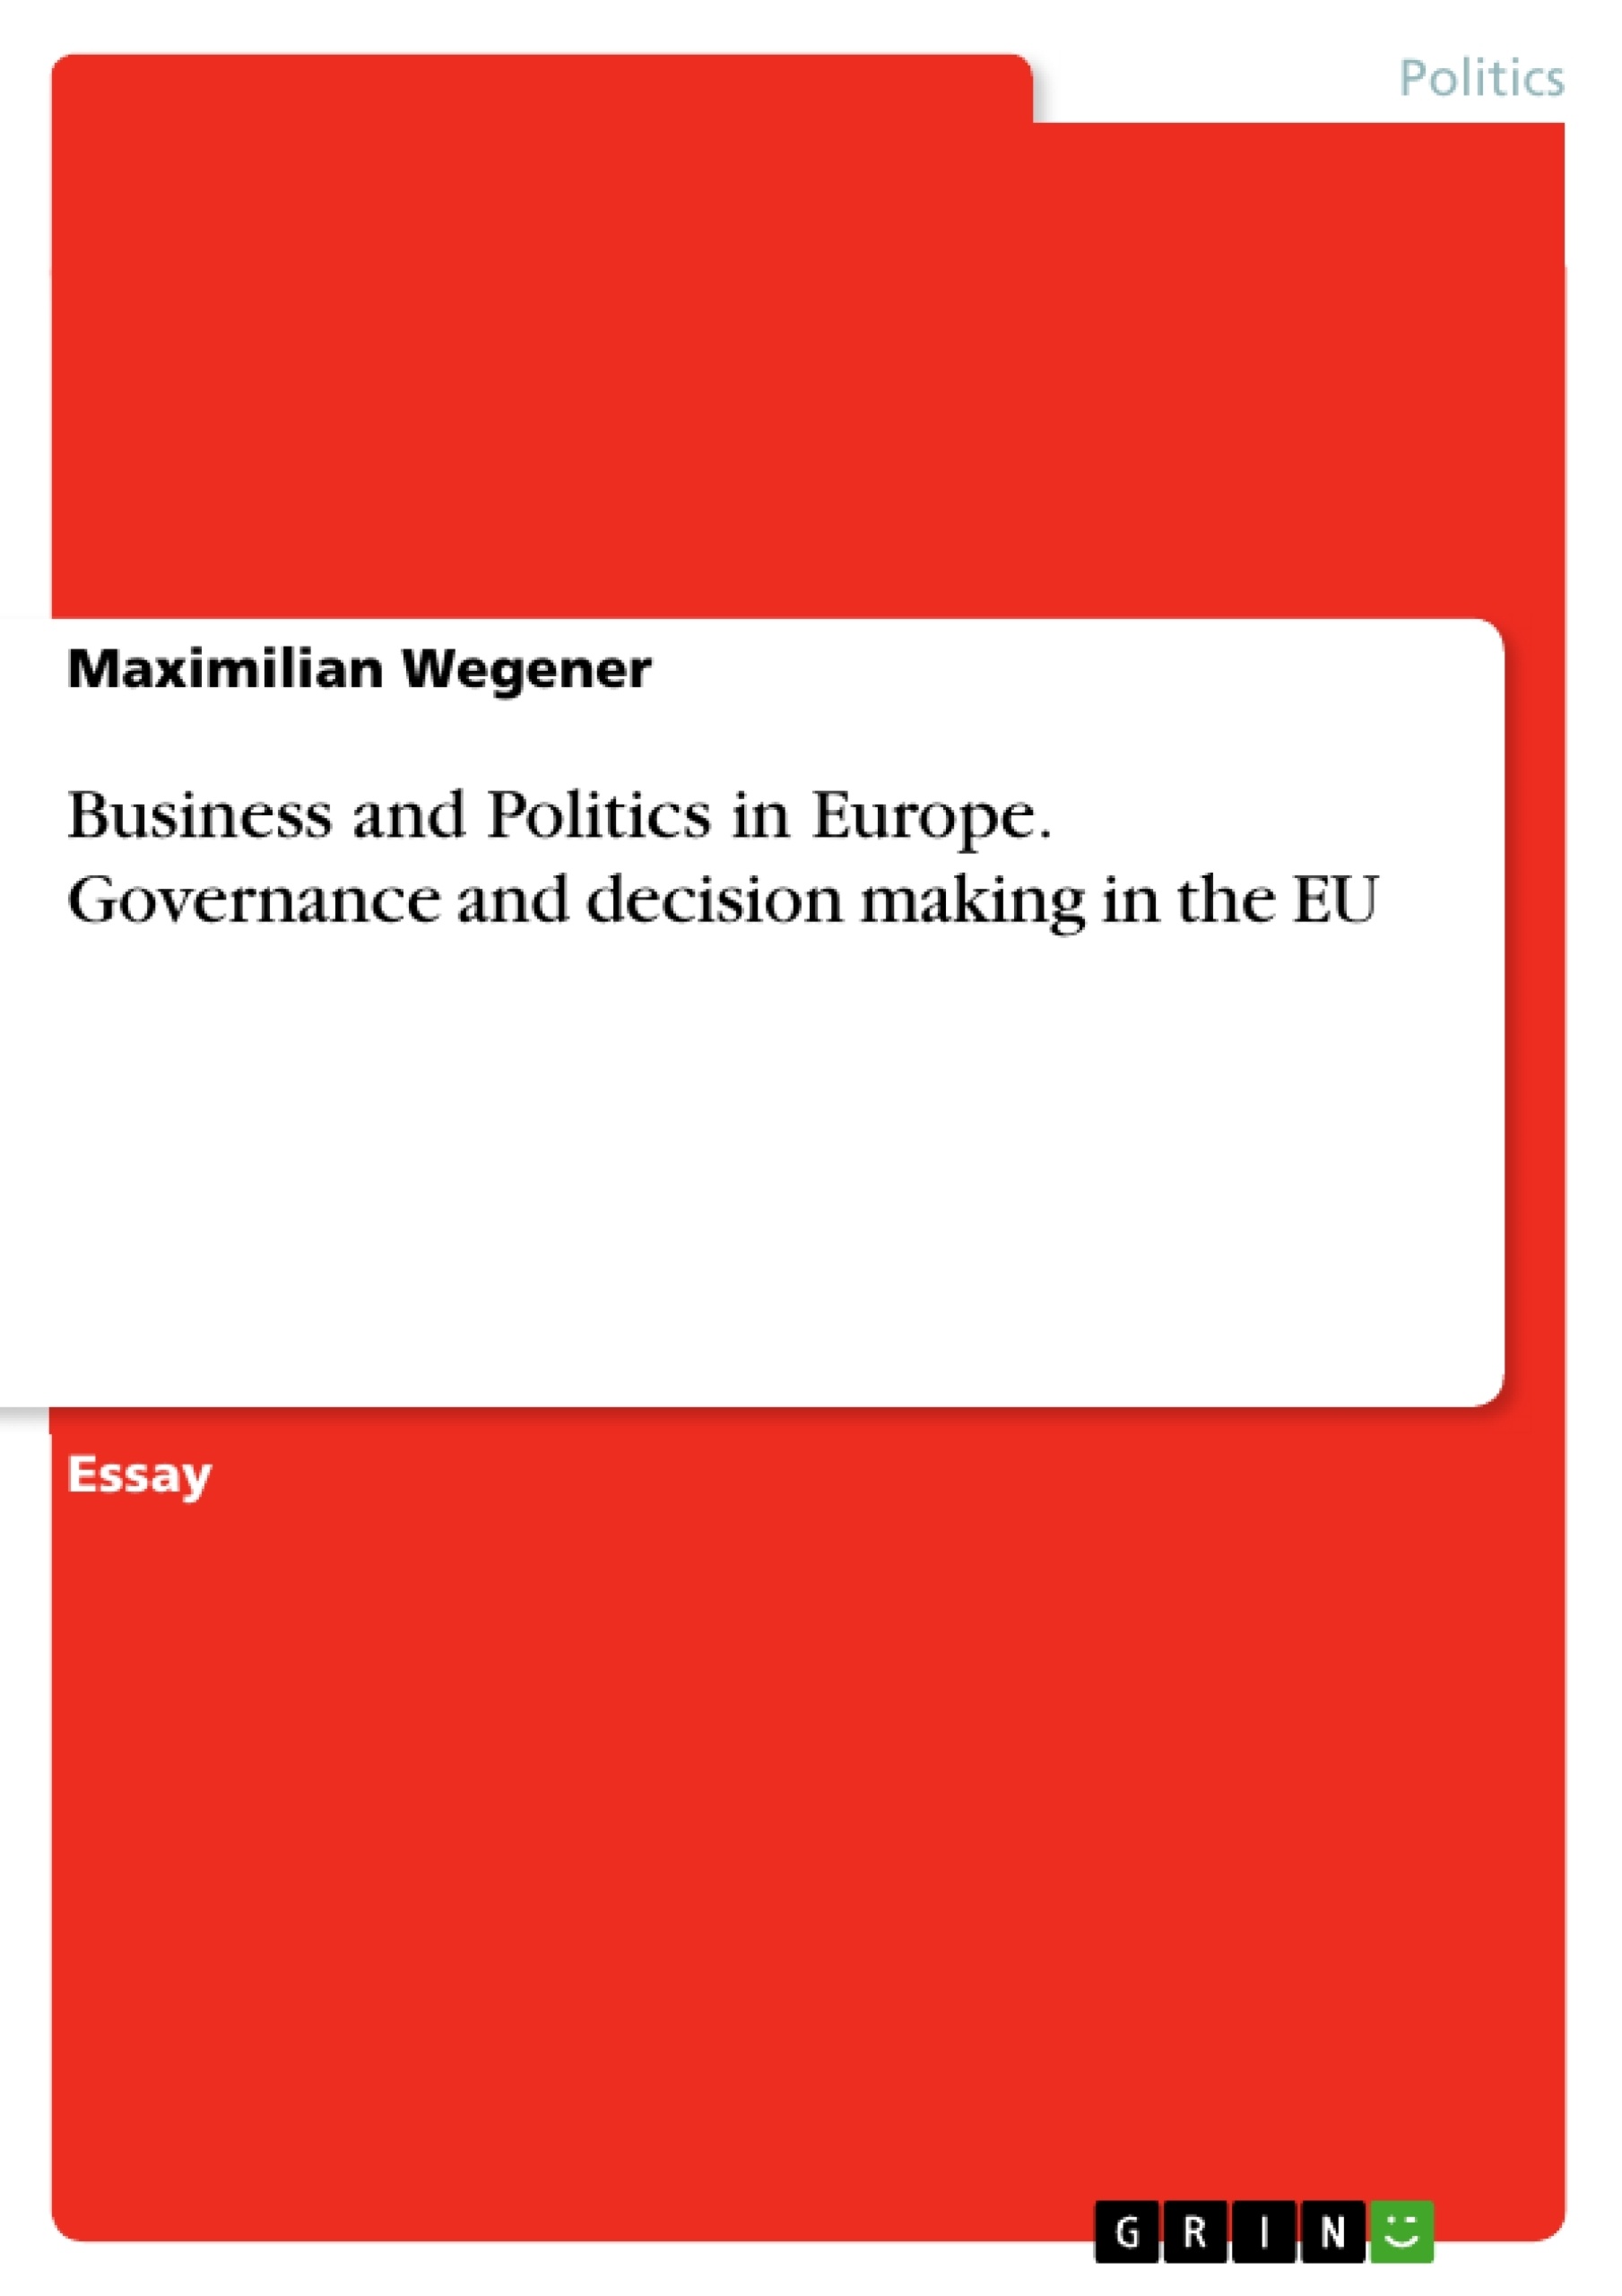 Title: Business and Politics in Europe. Governance and decision making in the EU